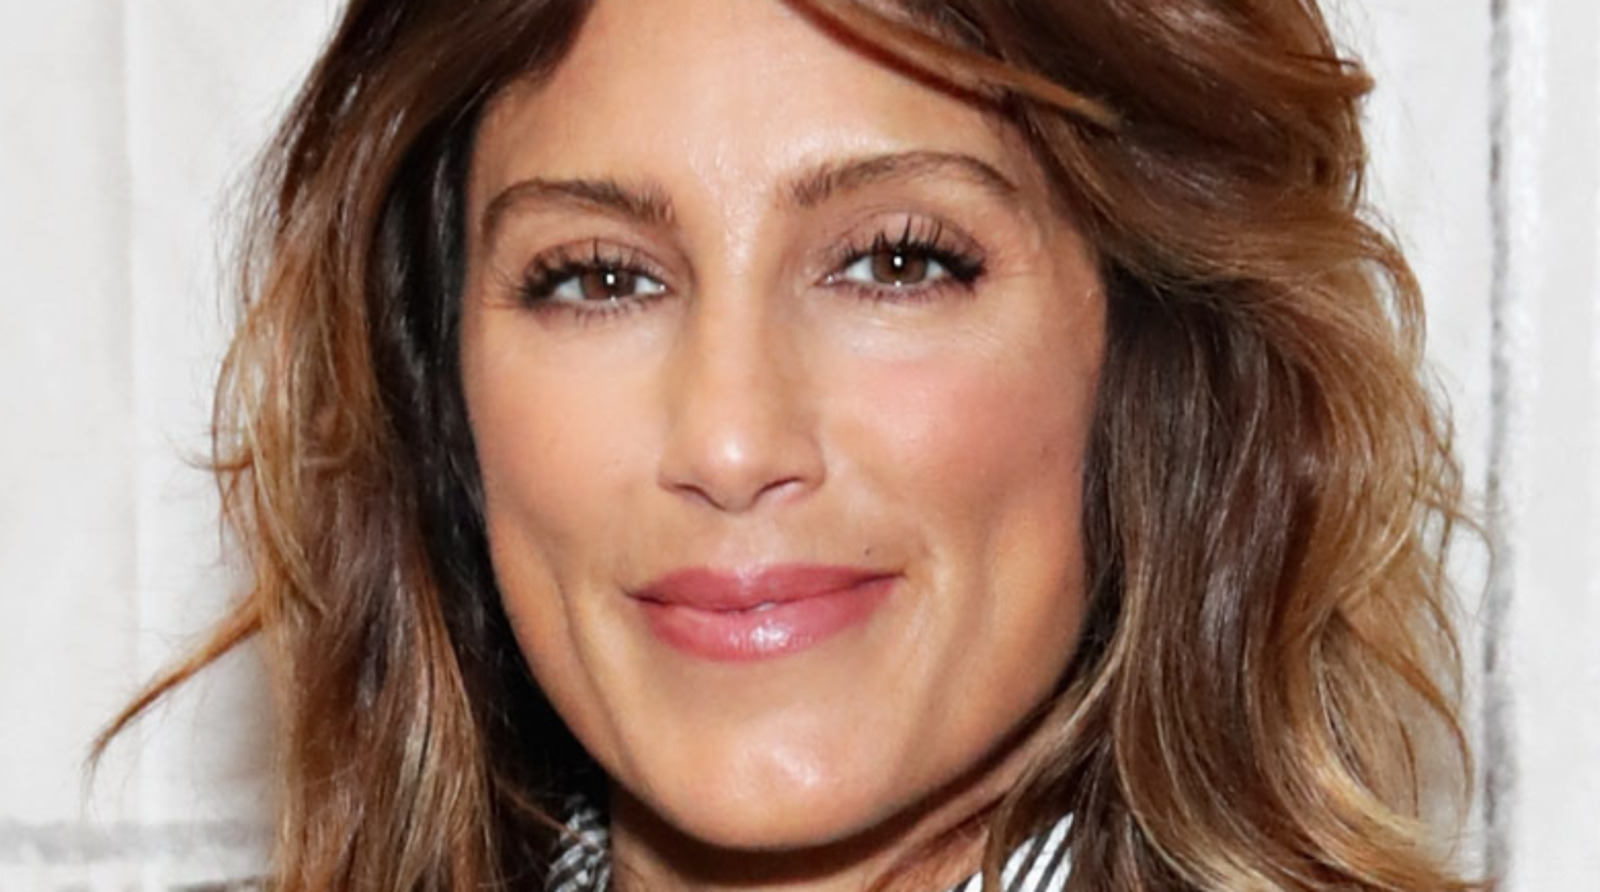 The Truth Behind Jennifer Esposito's Exit From NCIS